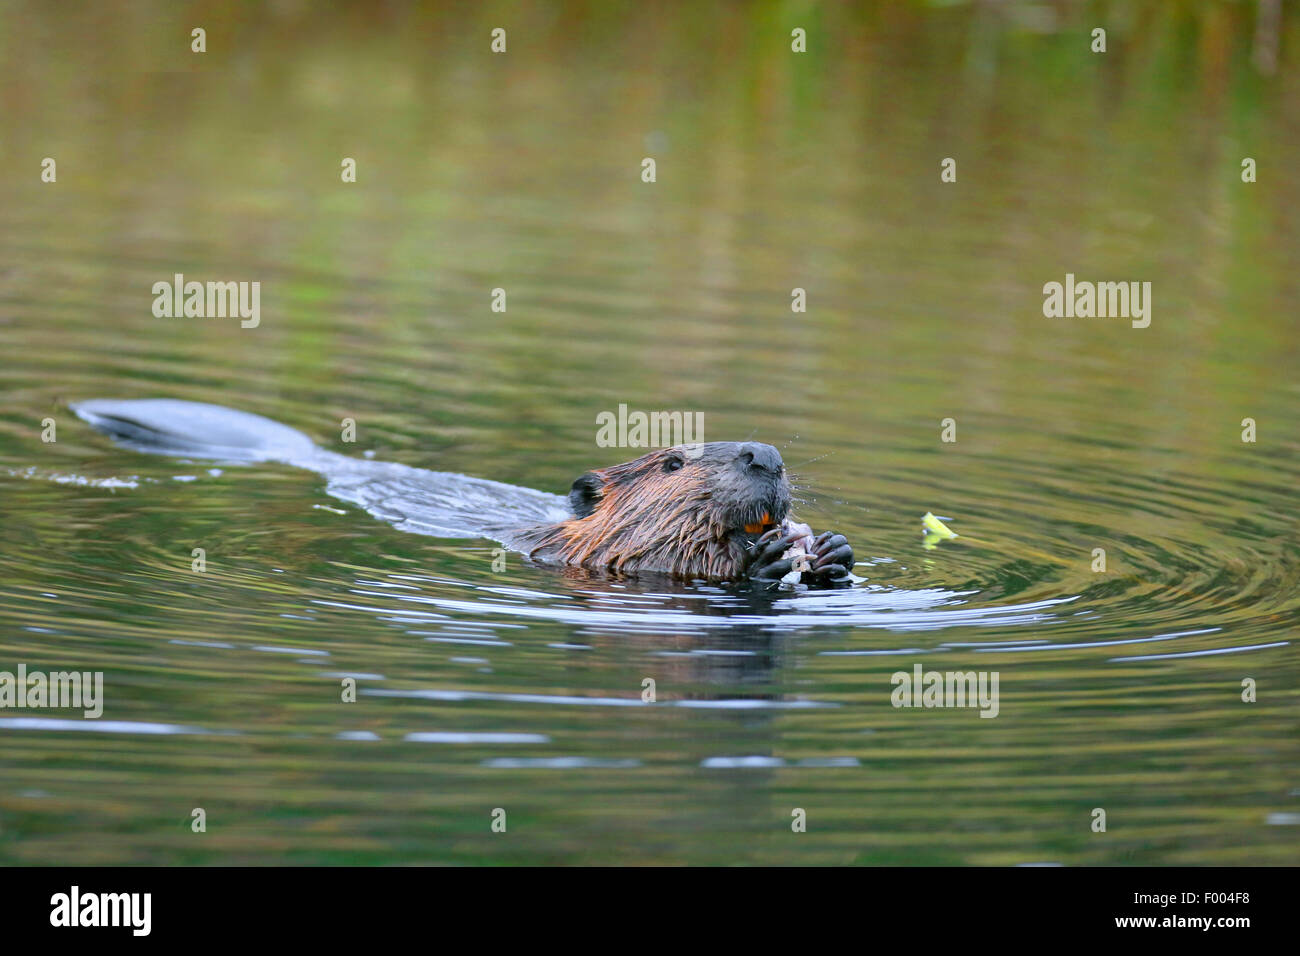 North American beaver, Canadian beaver (Castor canadensis), swimming and feeding, Canada, Ontario, Algonquin Provincial Park Stock Photo